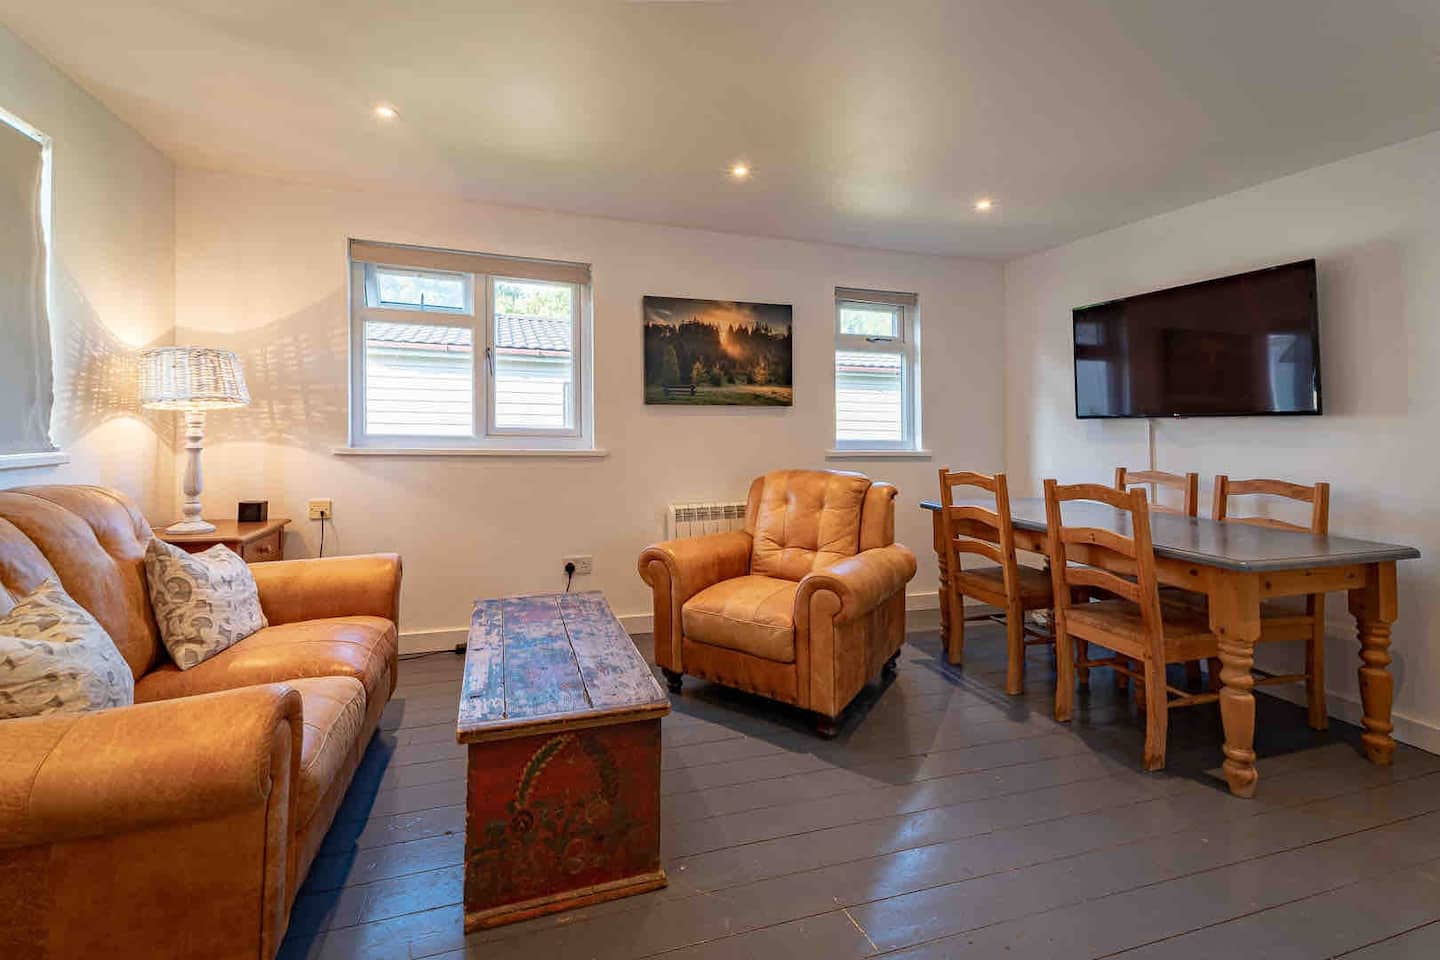 Accommodation at Bedgebury Equestrian is also available.